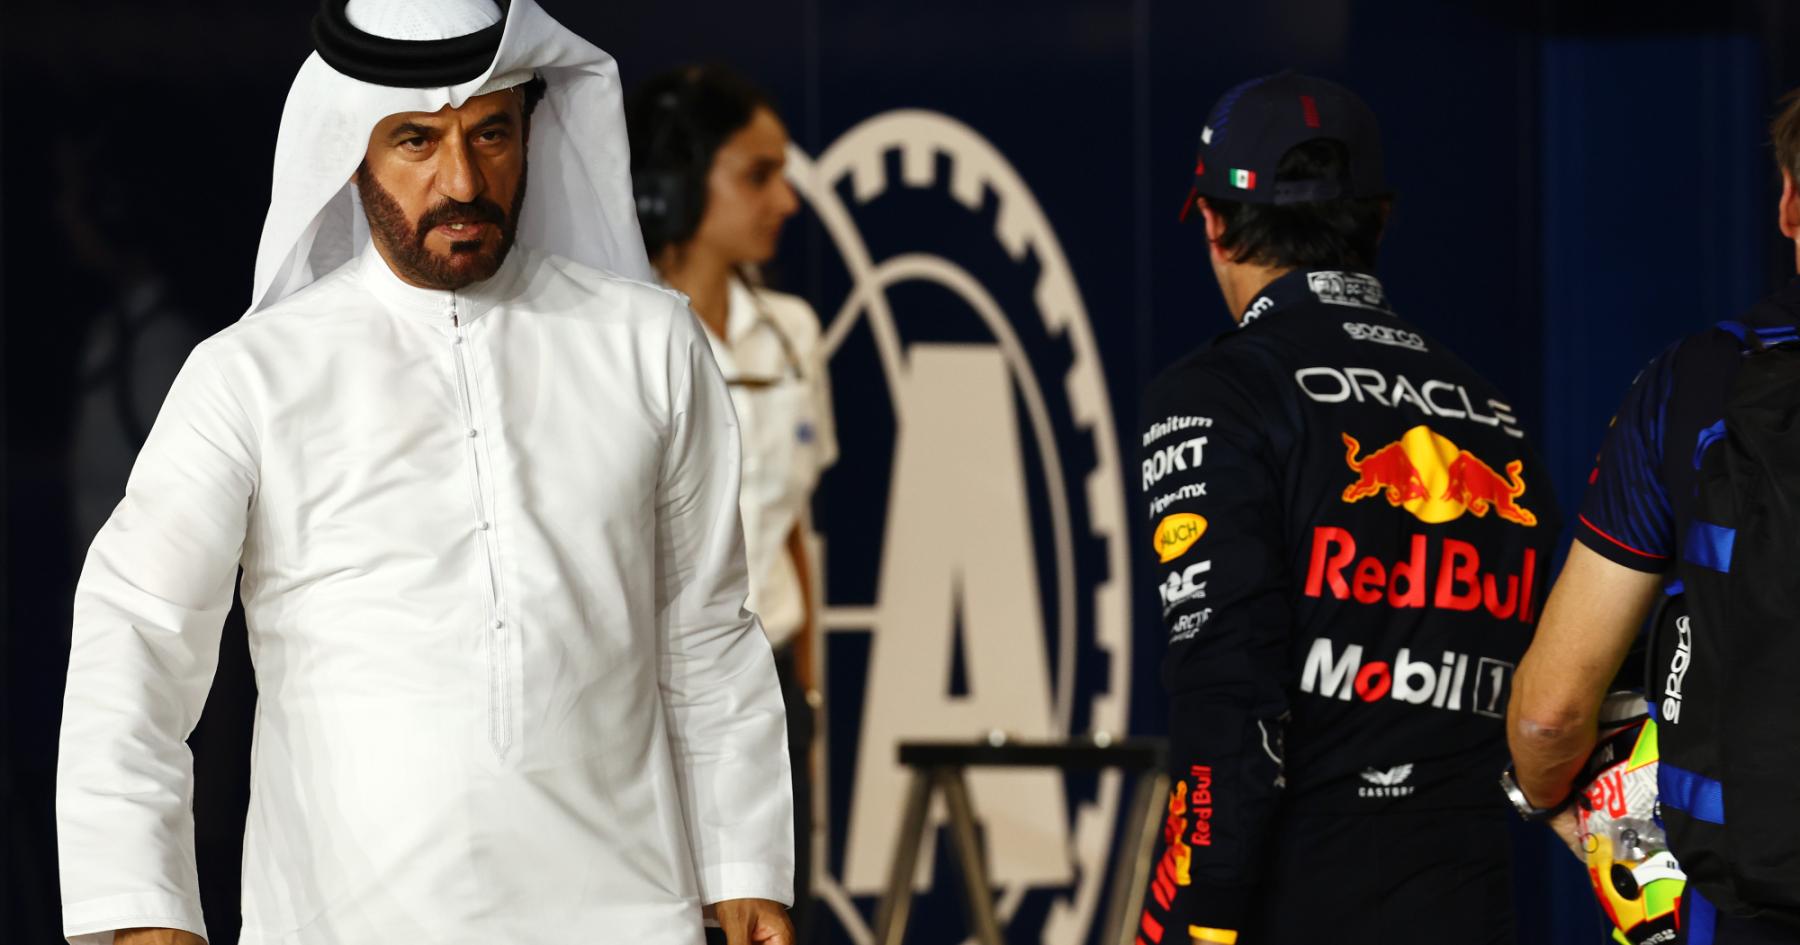 Fédération Internationale de l'Automobile (FIA) Responds with Clarity and Integrity to Ben Sulayem Allegations